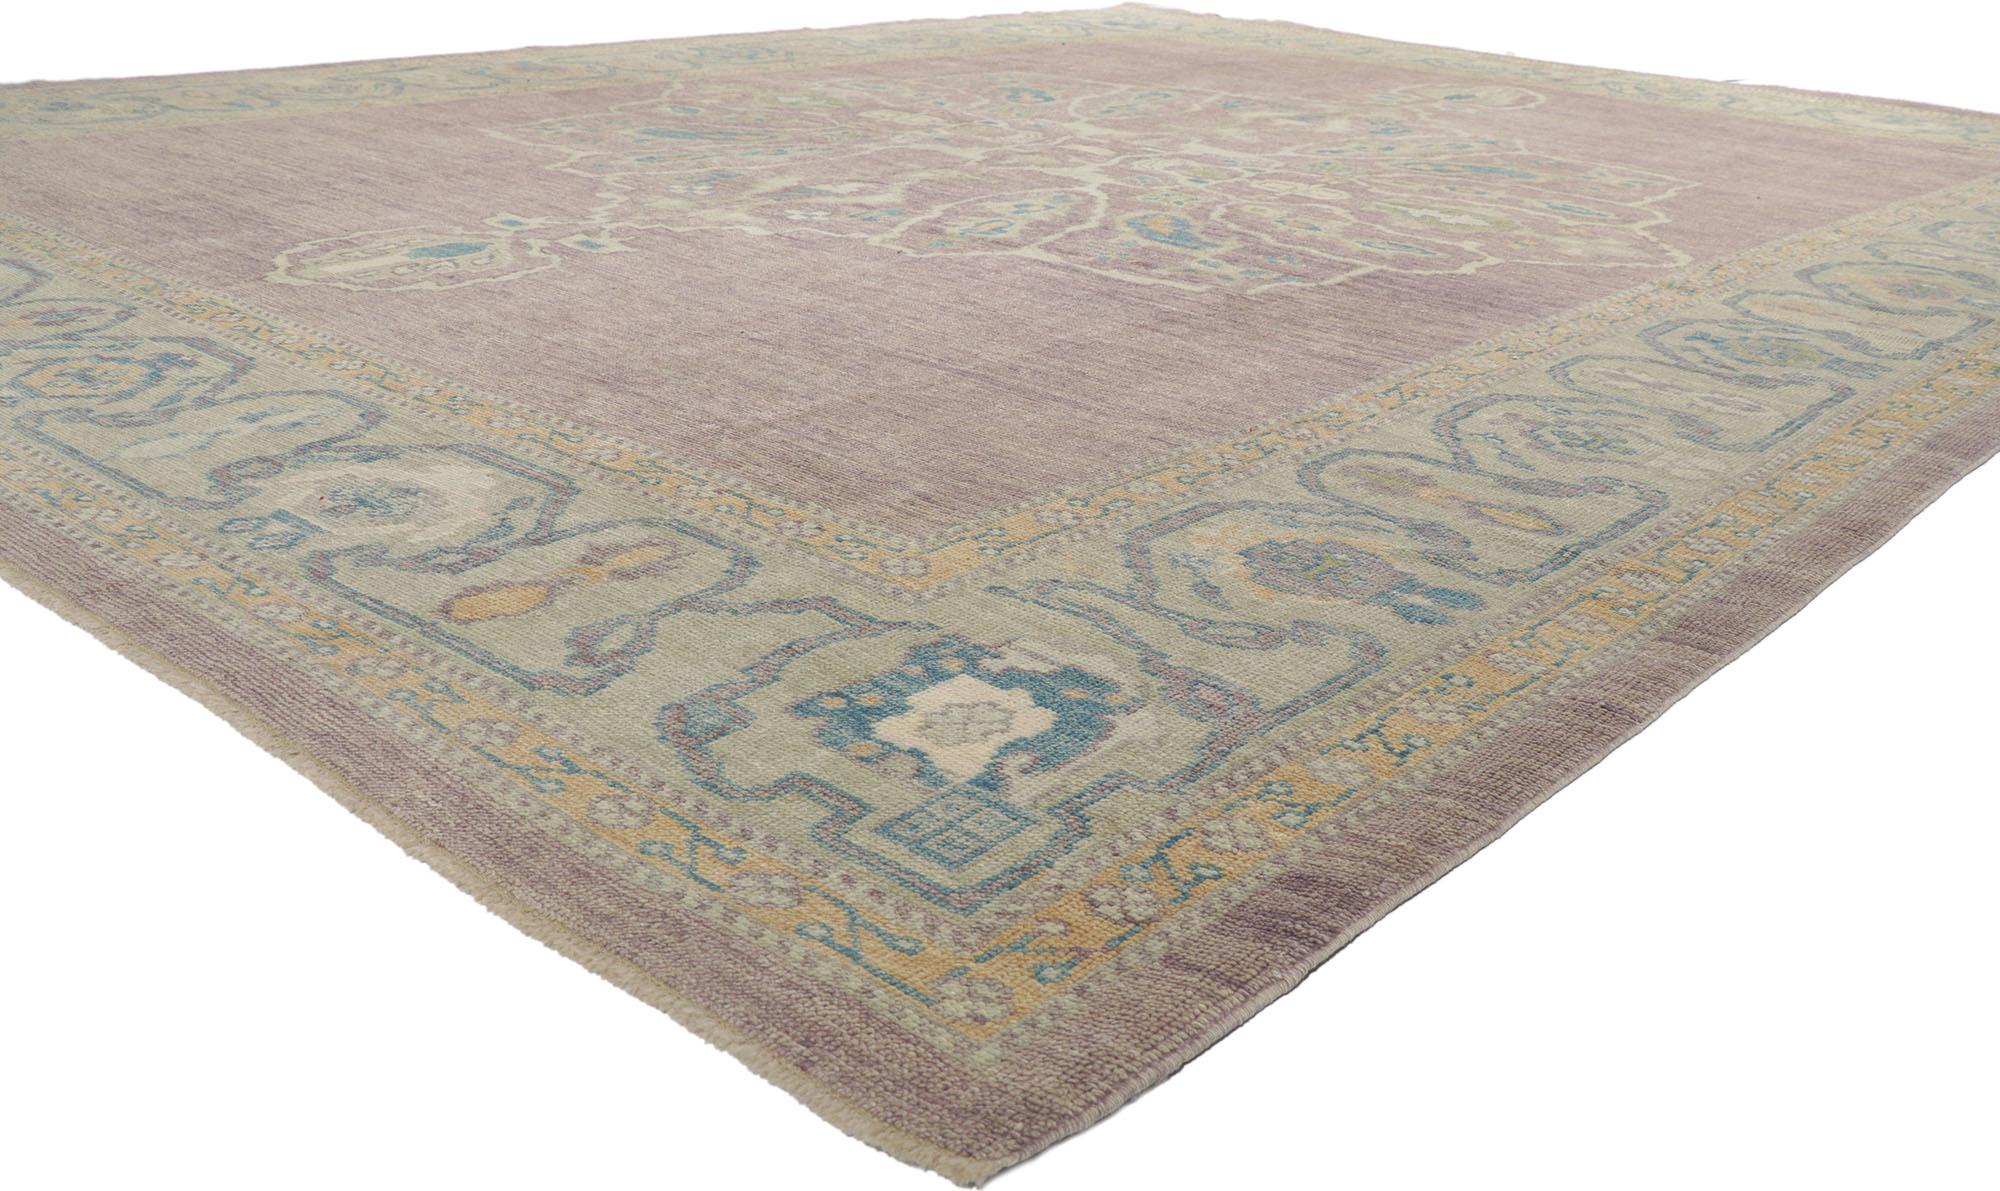 53778 New Contemporary Turkish Oushak Rug 12'01 x 15'07. With its effortless beauty and timeless design, this hand knotted wool contemporary Turkish Oushak rug is poised to impress. Taking center stage is grand-scale open medallion decorated with a